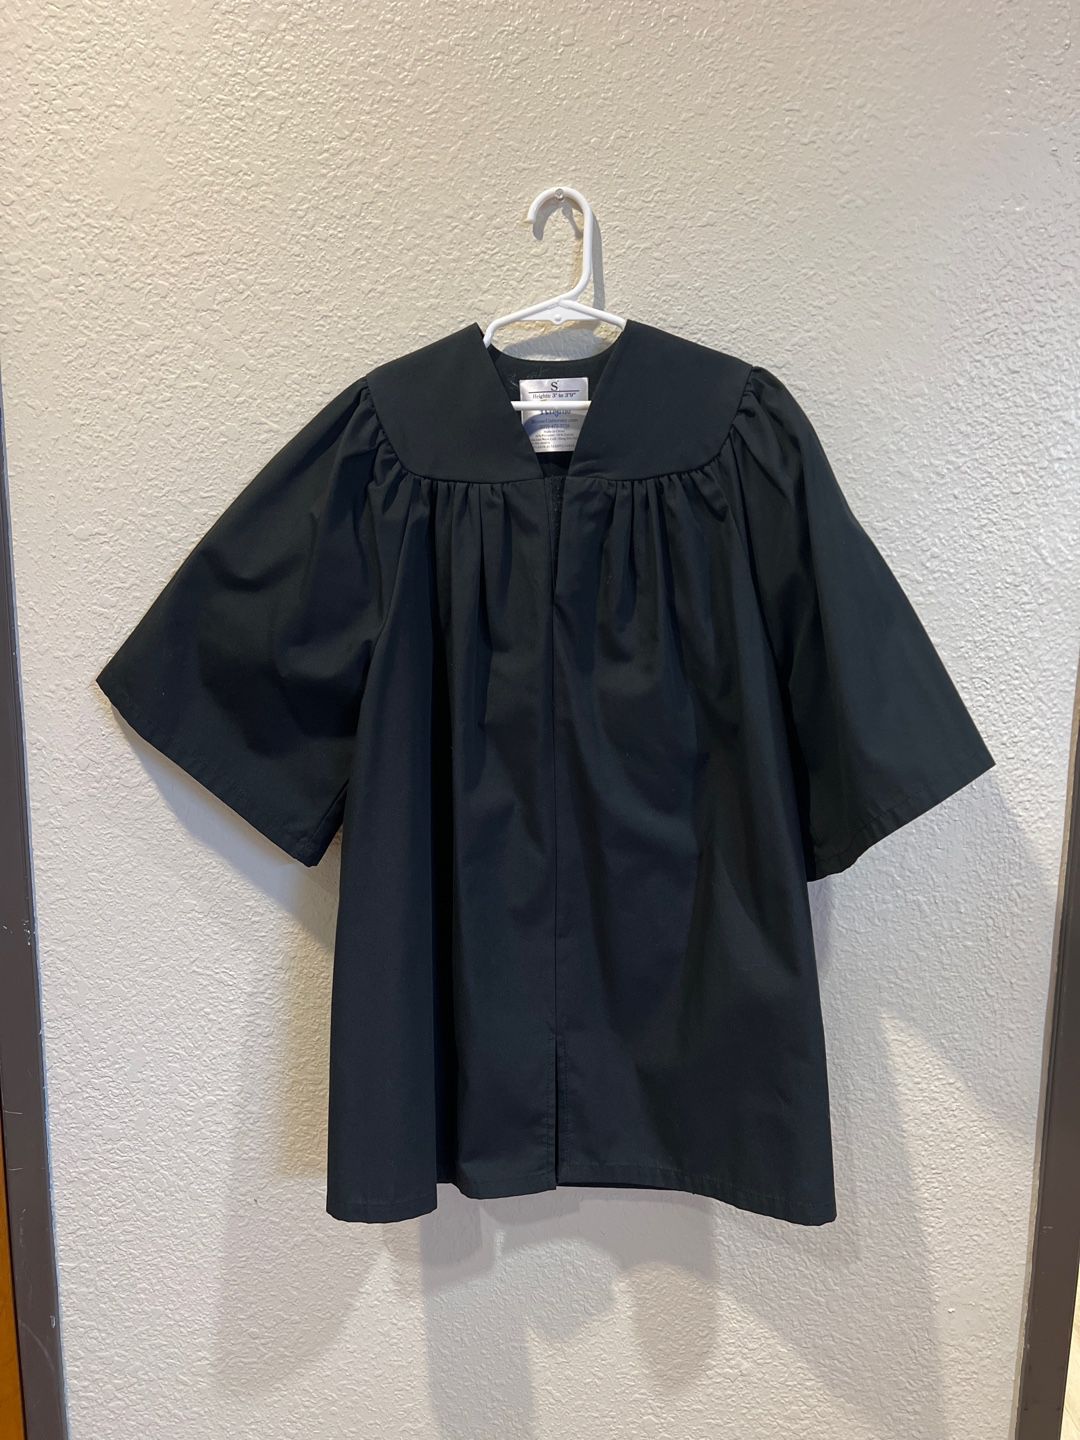 Used Size Small Graduation Gowns Only ($2 Each)